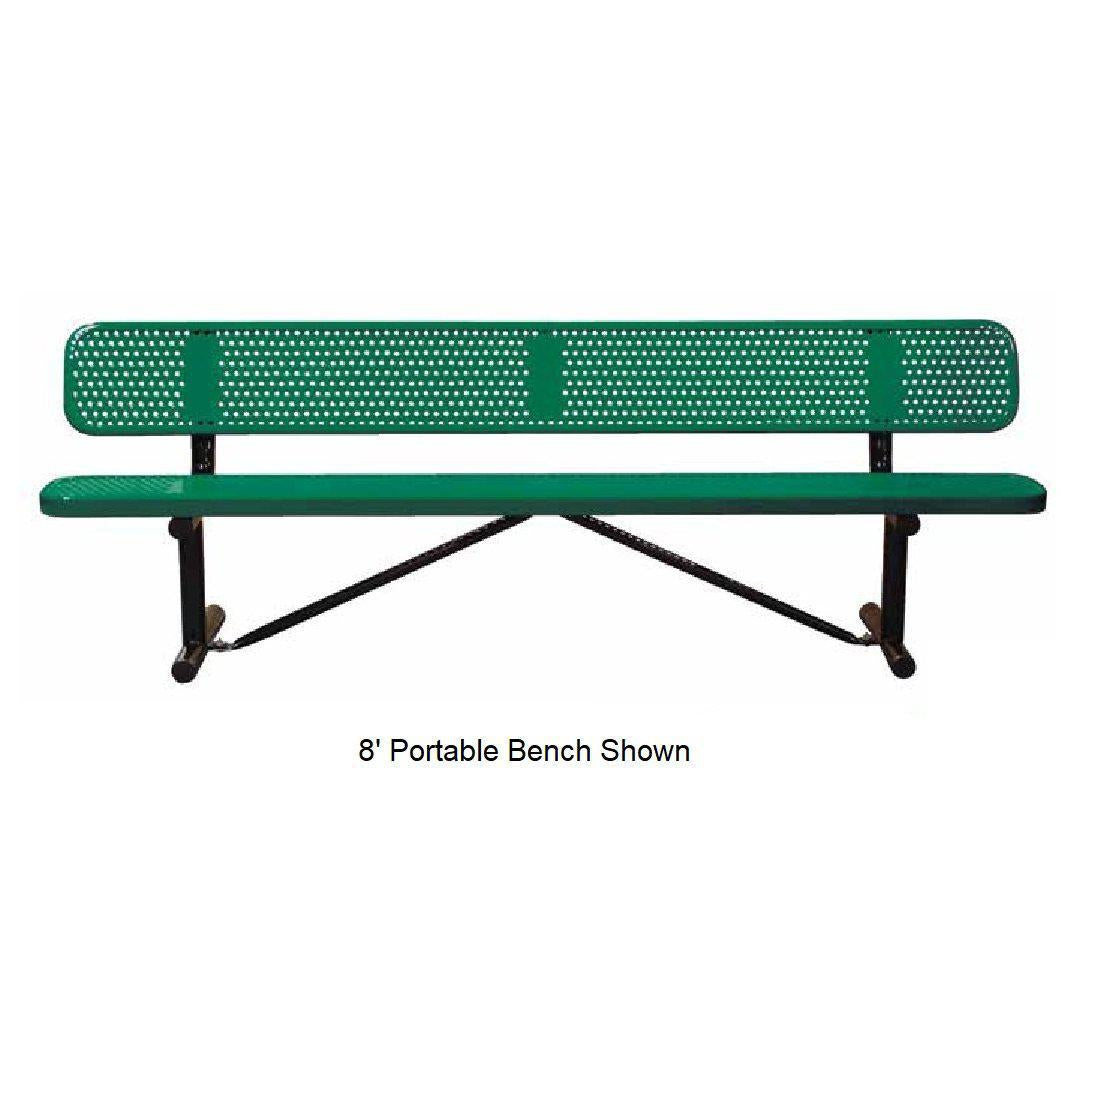 10’ Standard Perforated Bench With Back, In Ground Mount